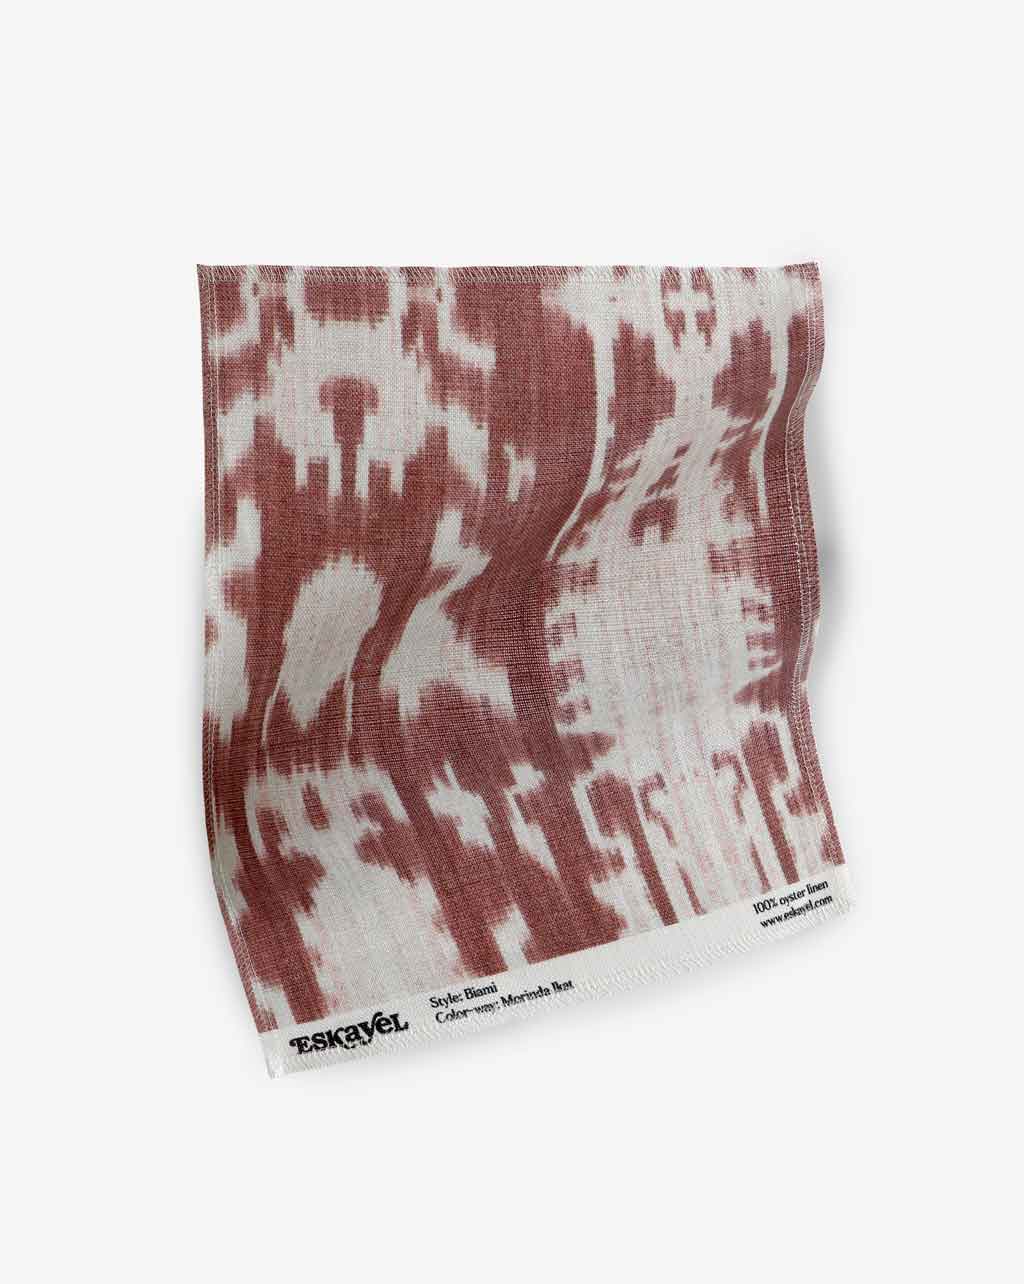 A red and white ikat fabric with the Biami  Fabric Morinda Ikat pattern on a white background